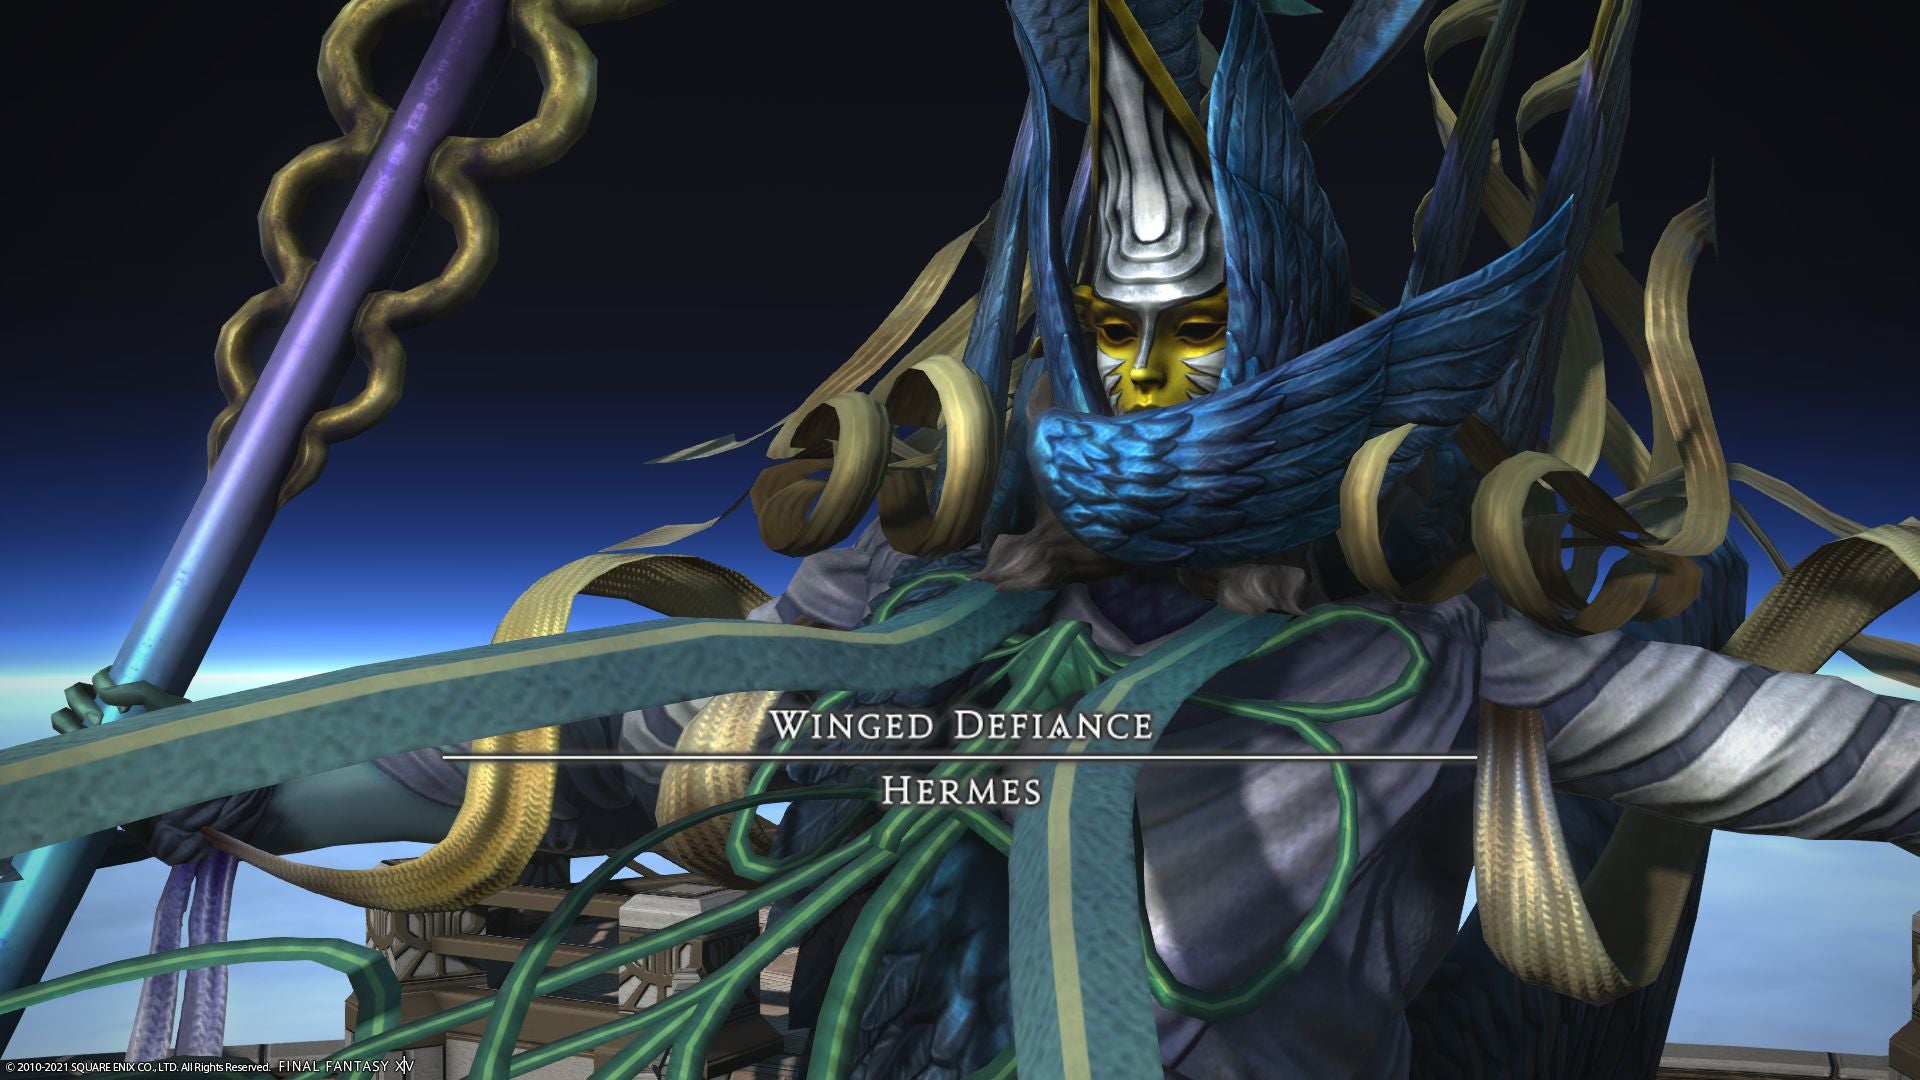 FF14 State of the Game - close up of Hermès, the Winged Defiance